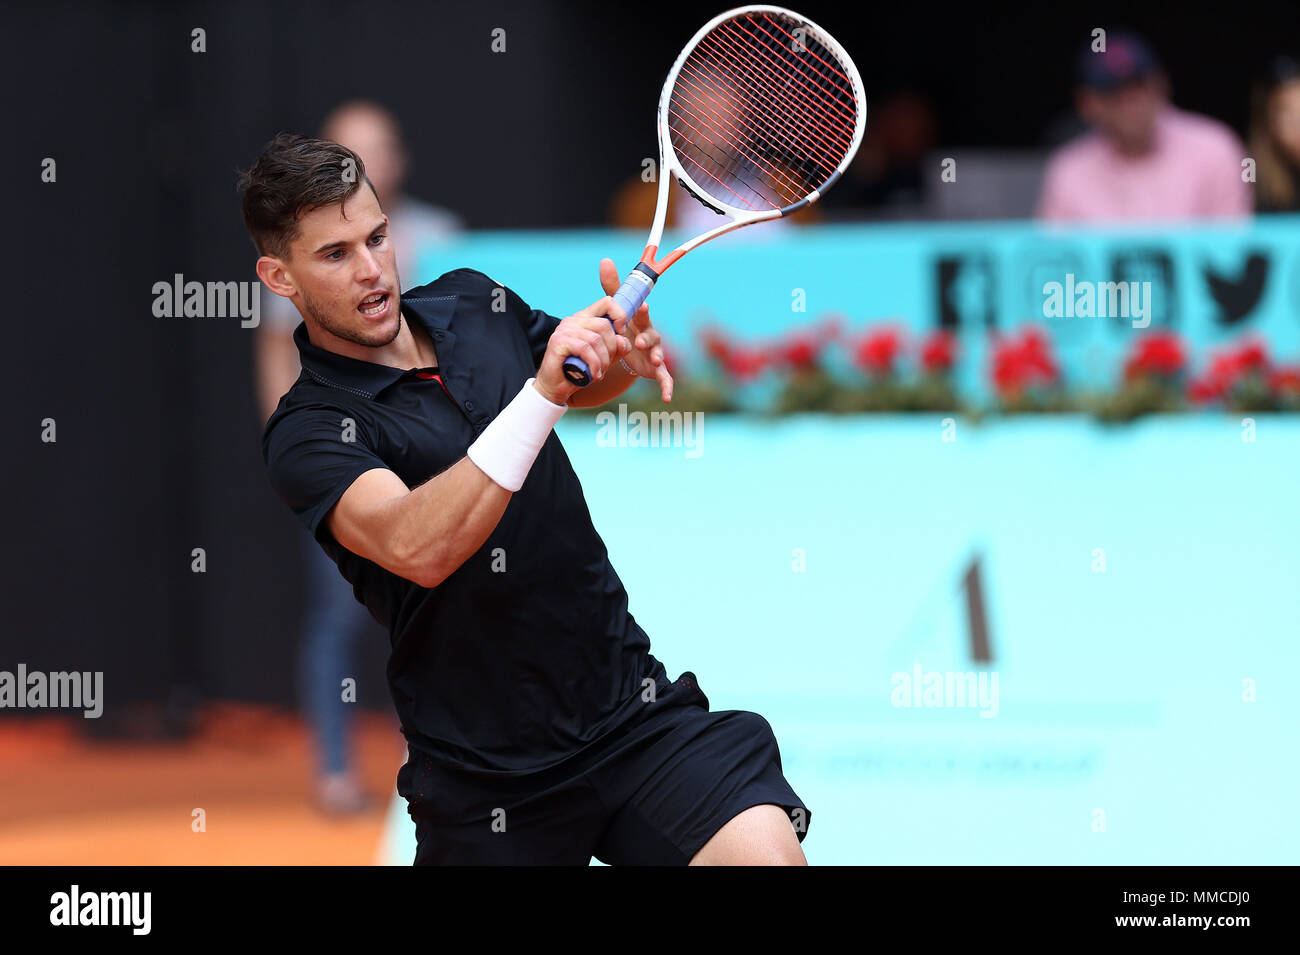 Madrid, Spain. 10th May, 2018. Dominic Thiem of Austria plays forehand against Borna Coric of Croatia in their third round match during day six of the Mutua Madrid Open tennis tournament at the Caja Magica. Credit: Manu Reino/SOPA Images/ZUMA Wire/Alamy Live News Stock Photo